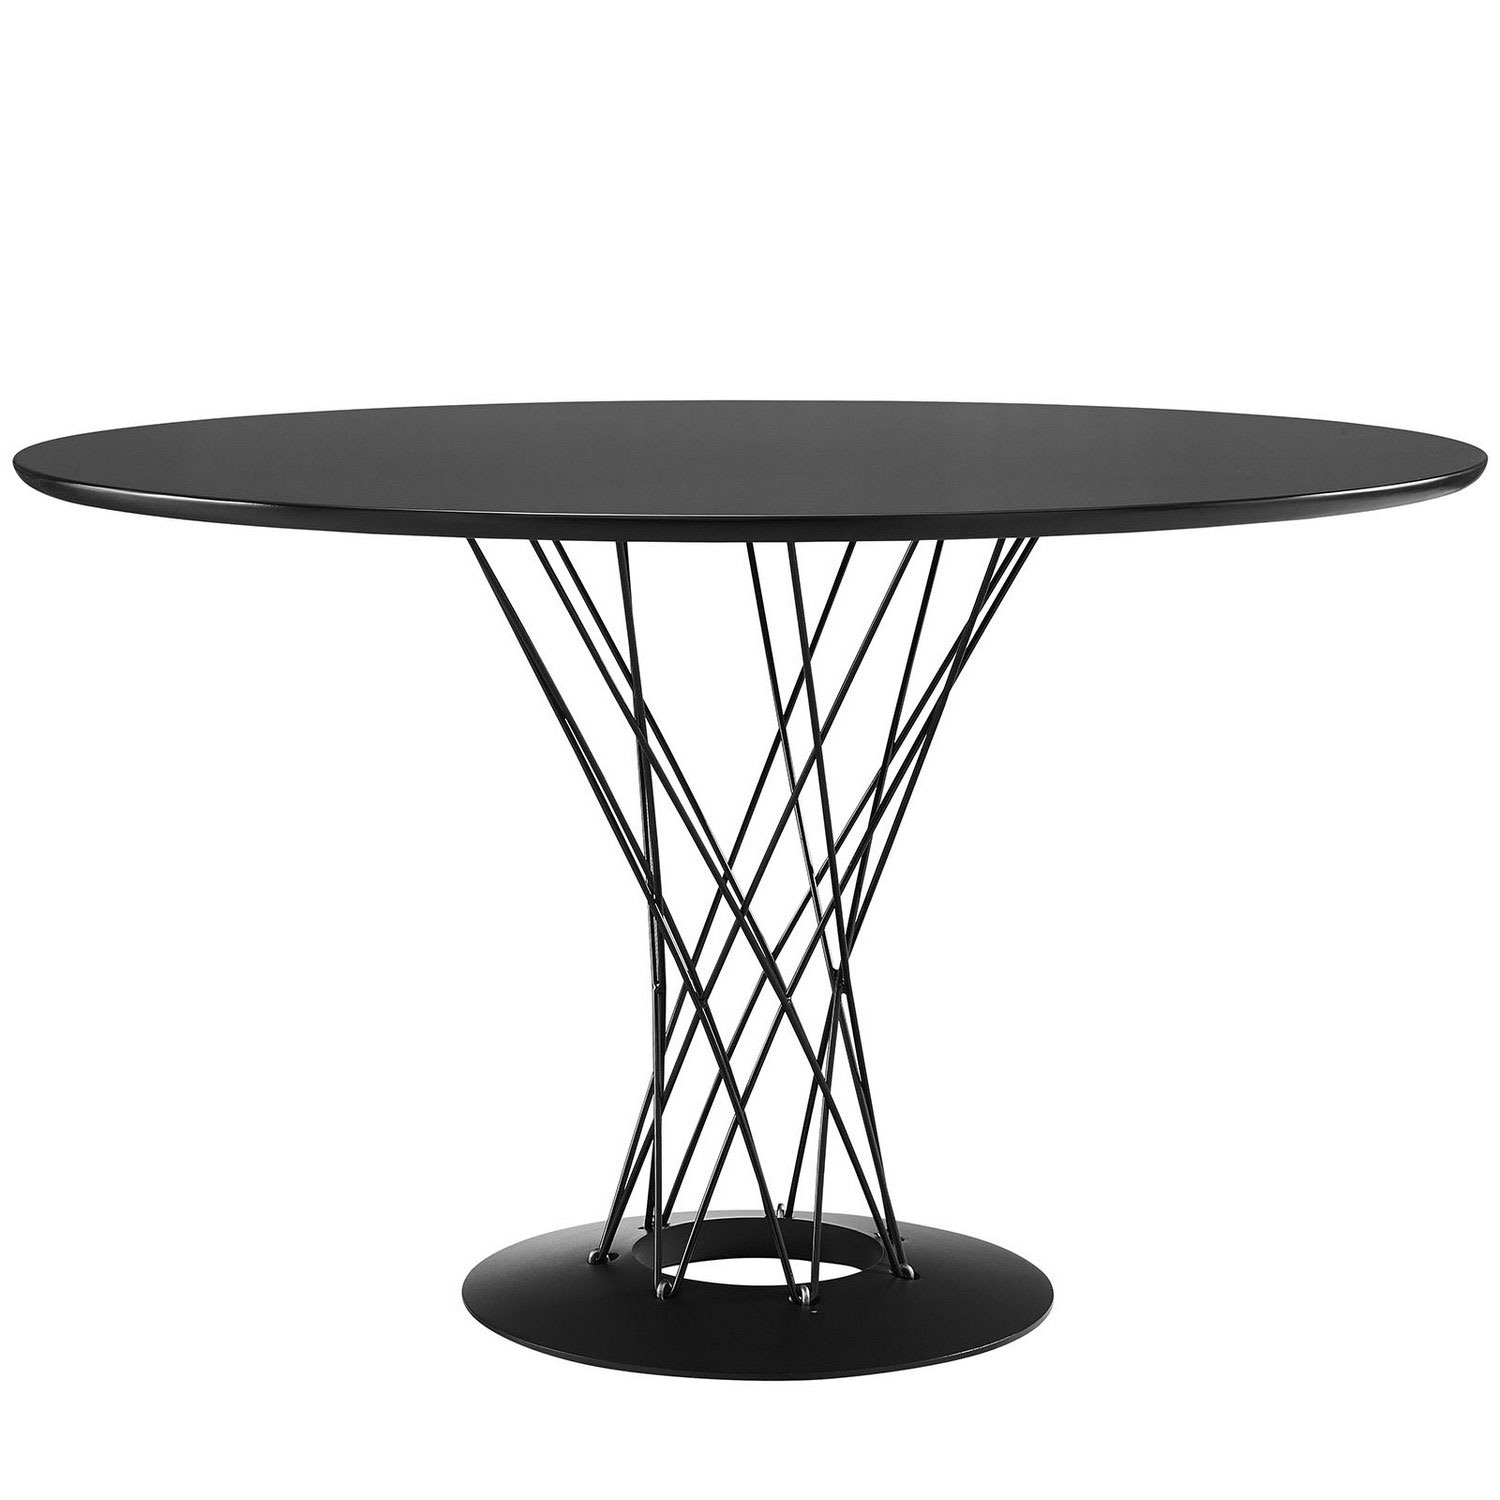 Modway Cyclone Stainless Steel Dining Table - Black